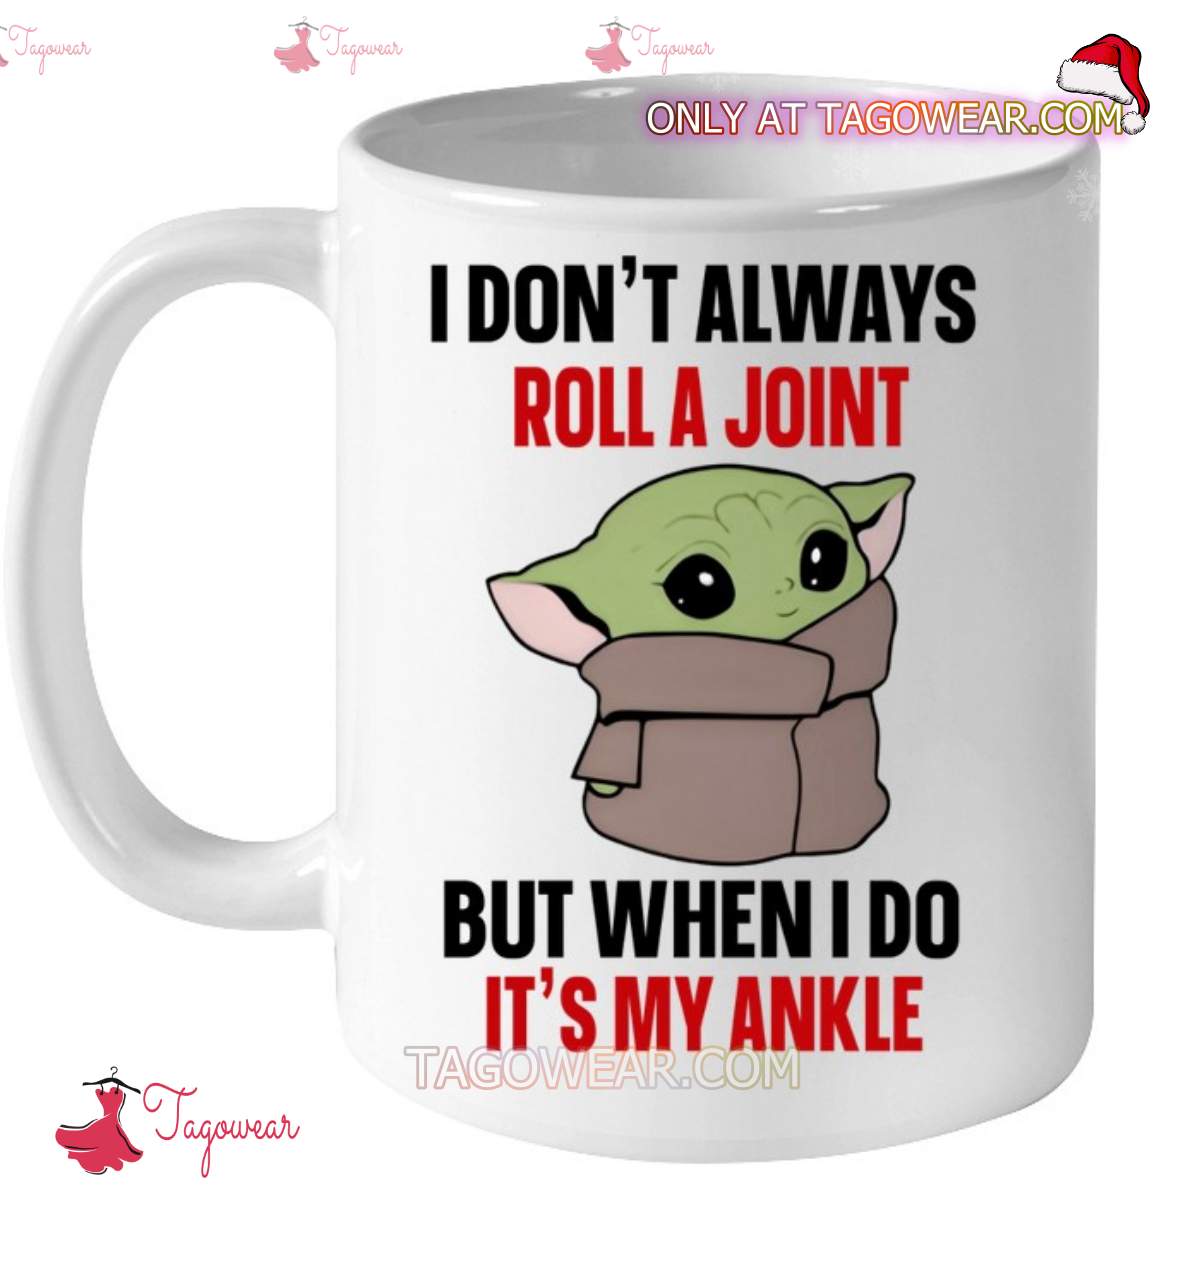 https://images.tagowear.com/2023/10/Baby-Yoda-I-Dont-Always-Roll-A-Joint-But-When-I-Do-Its-My-Ankle-Mug.jpg